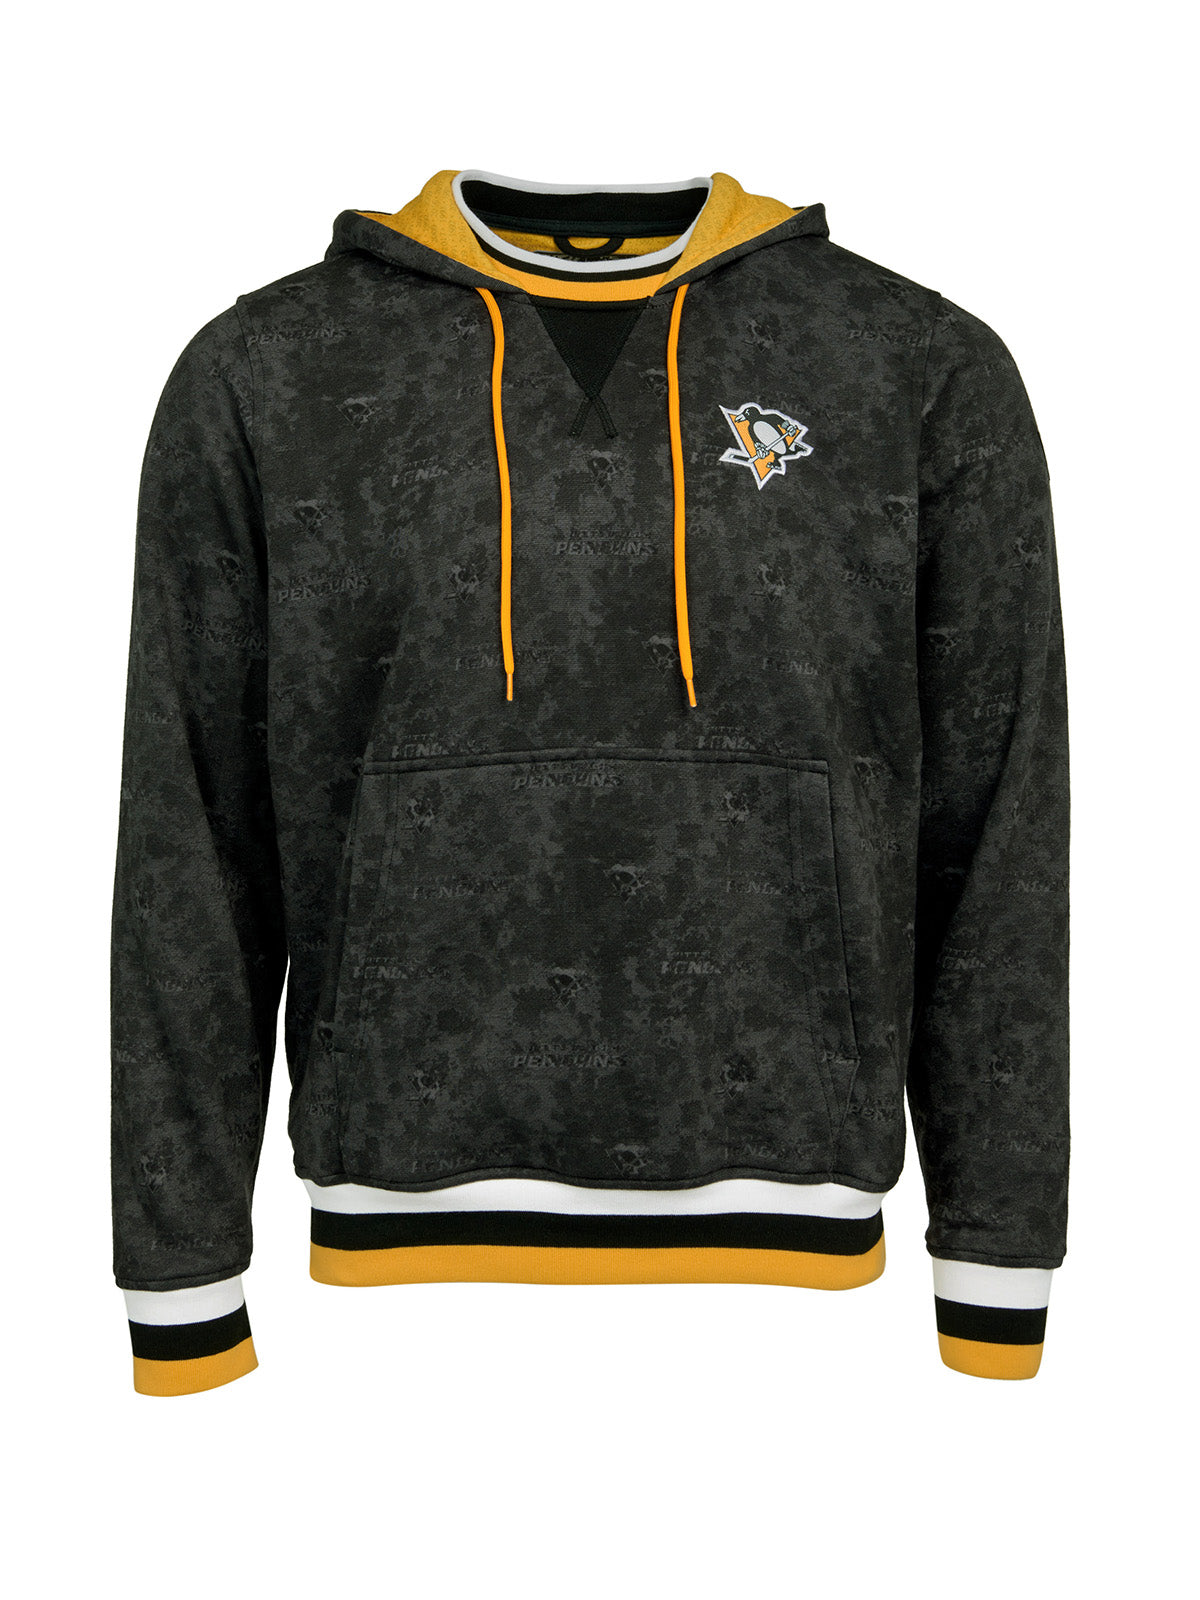 Pittsburgh Penguins Hoodie - Show your team spirit, with the iconic team logo patch on the front left chest, and proudly display your Pittsburgh Penguins support in their team colors with this NHL hockey hoodie.